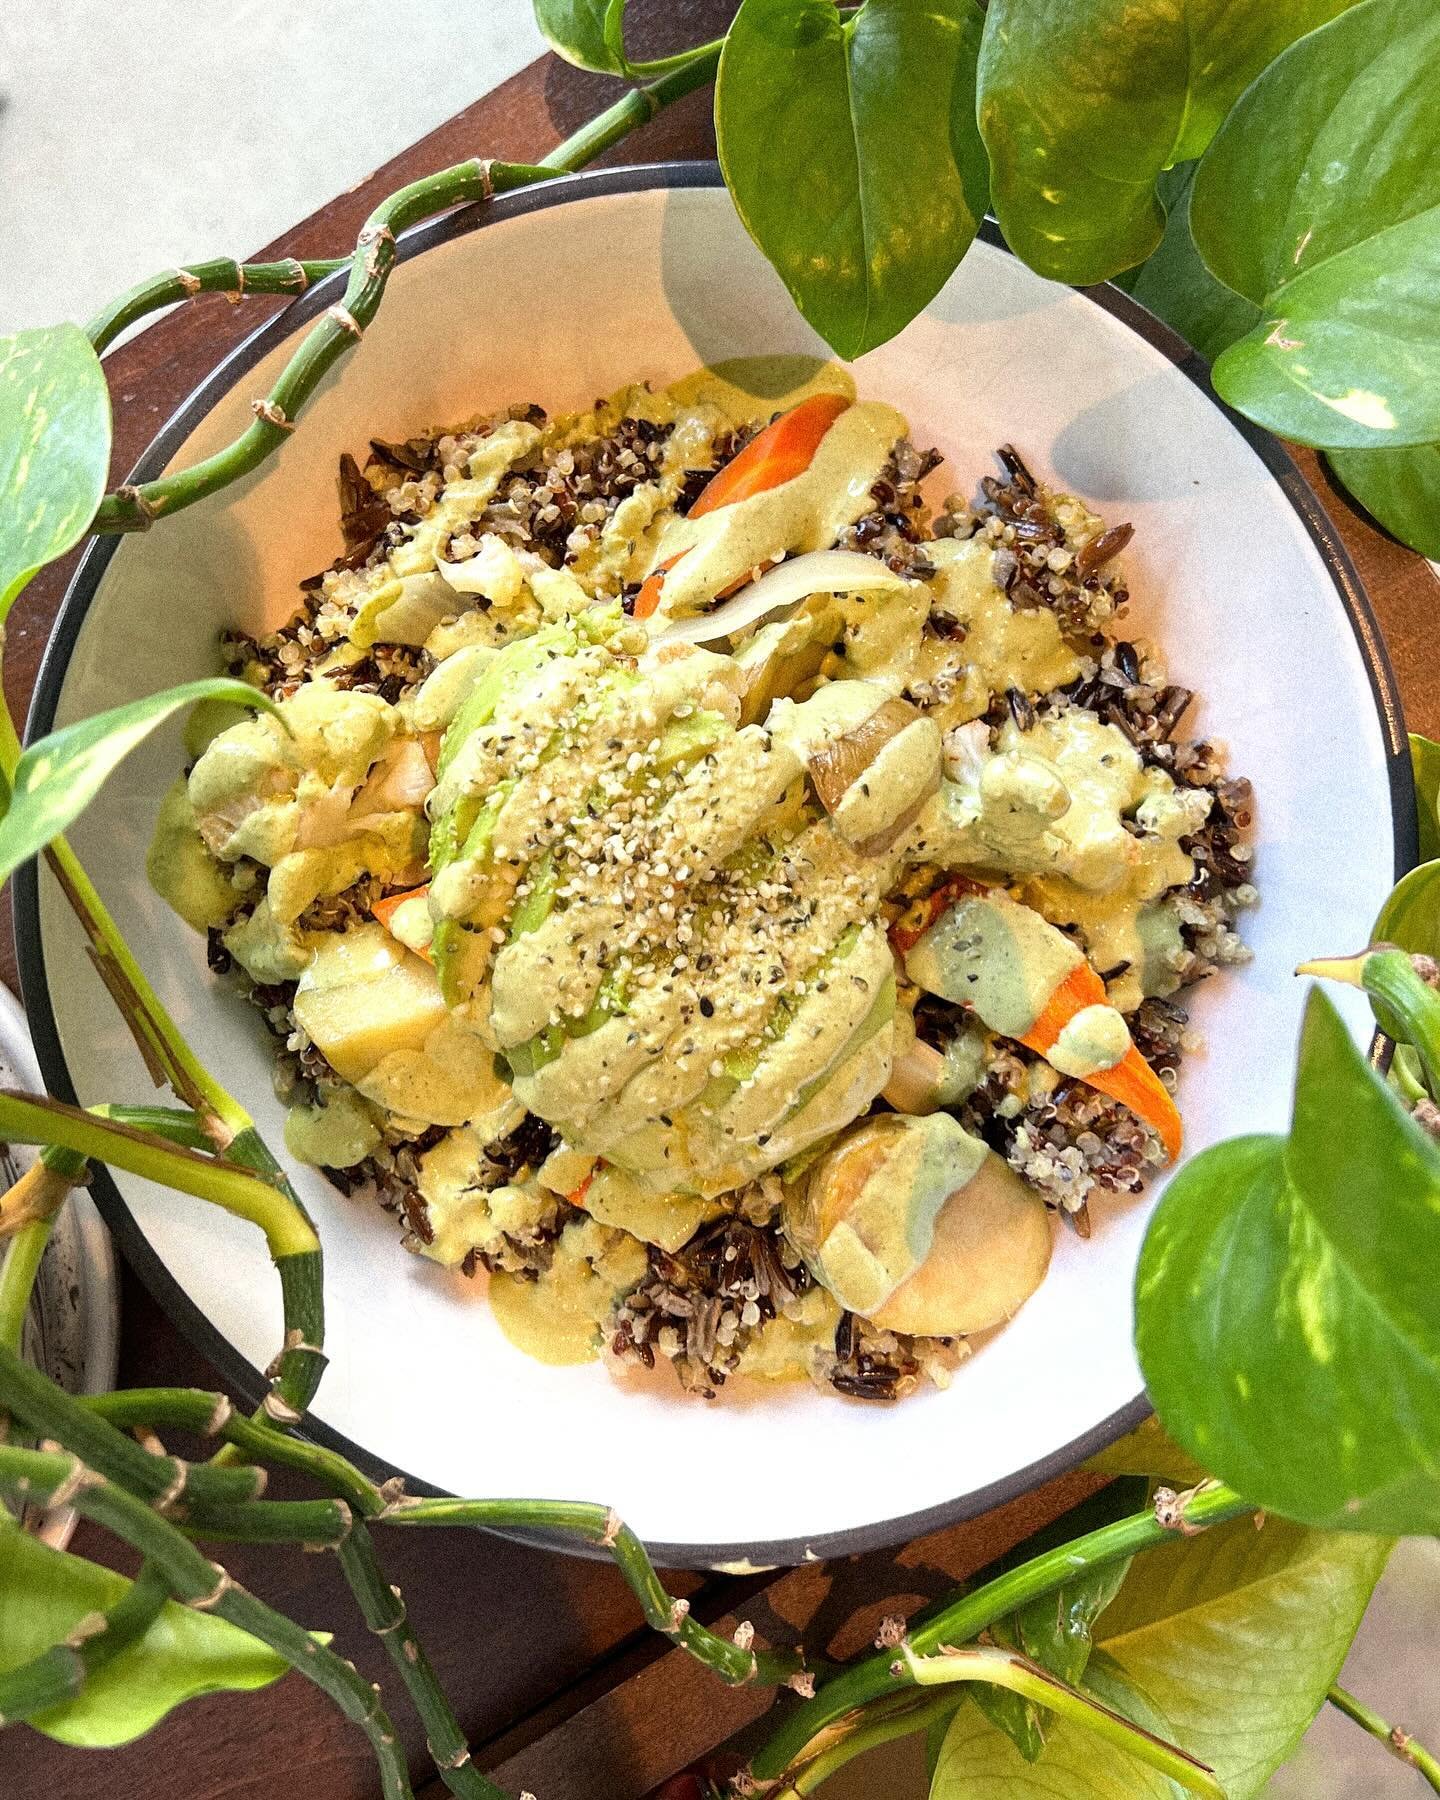 Now available for LUNCH (Tues-Fri)

Wild Rice &amp; Quinoa Bowl 
Roasted &amp; chilled cauliflower, fingerling potato, onion. Topped with avocado, hemp hearts, and lime dill cream 🌿 

We open at 11am! 

#plantbased